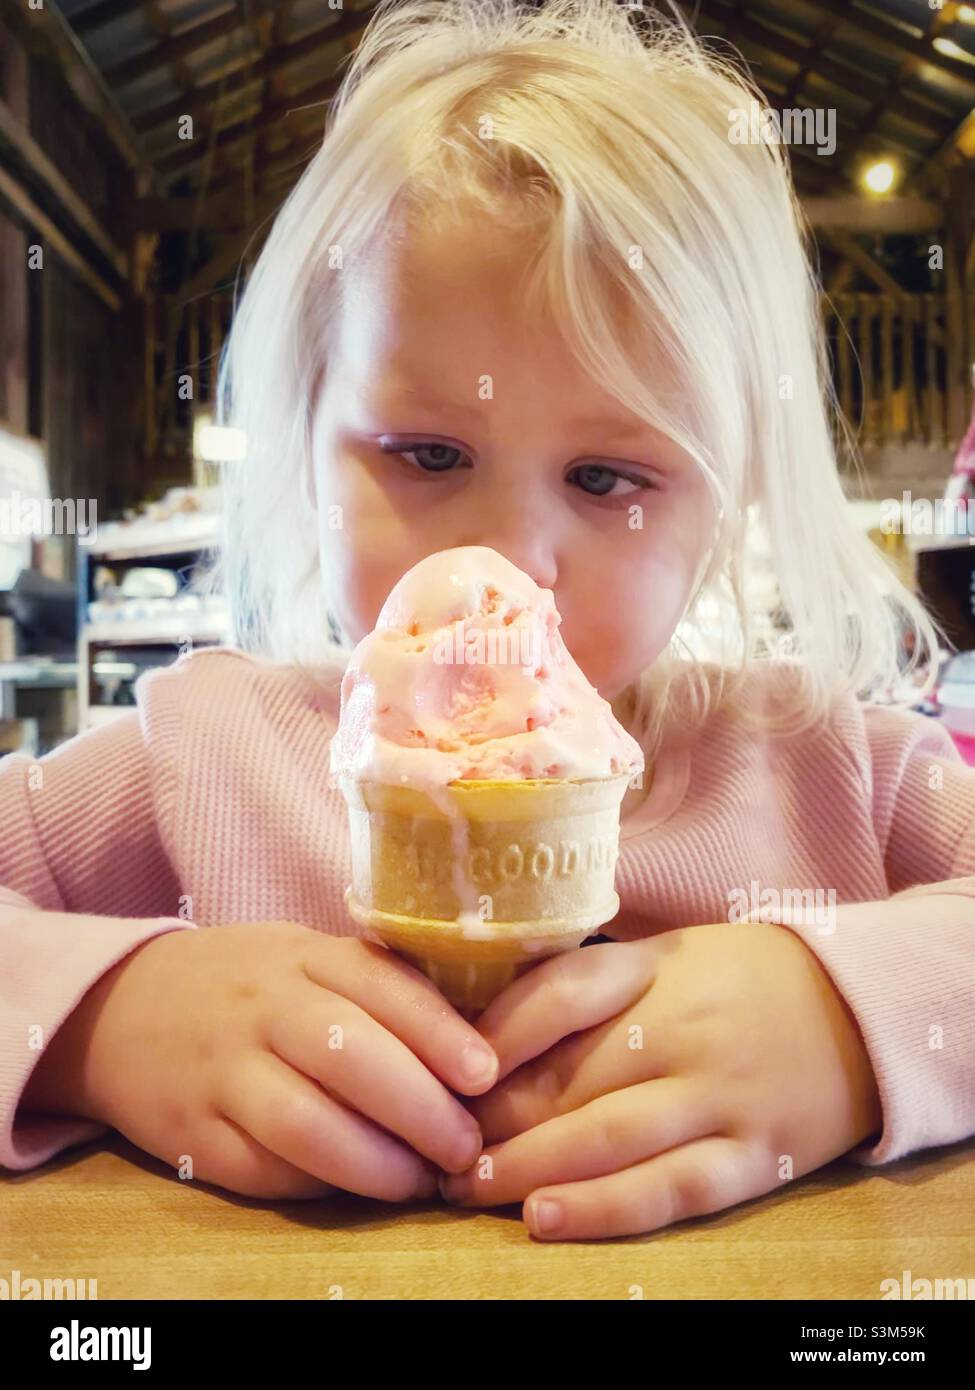 A little girl eyeing an ice cream cone. Stock Photo